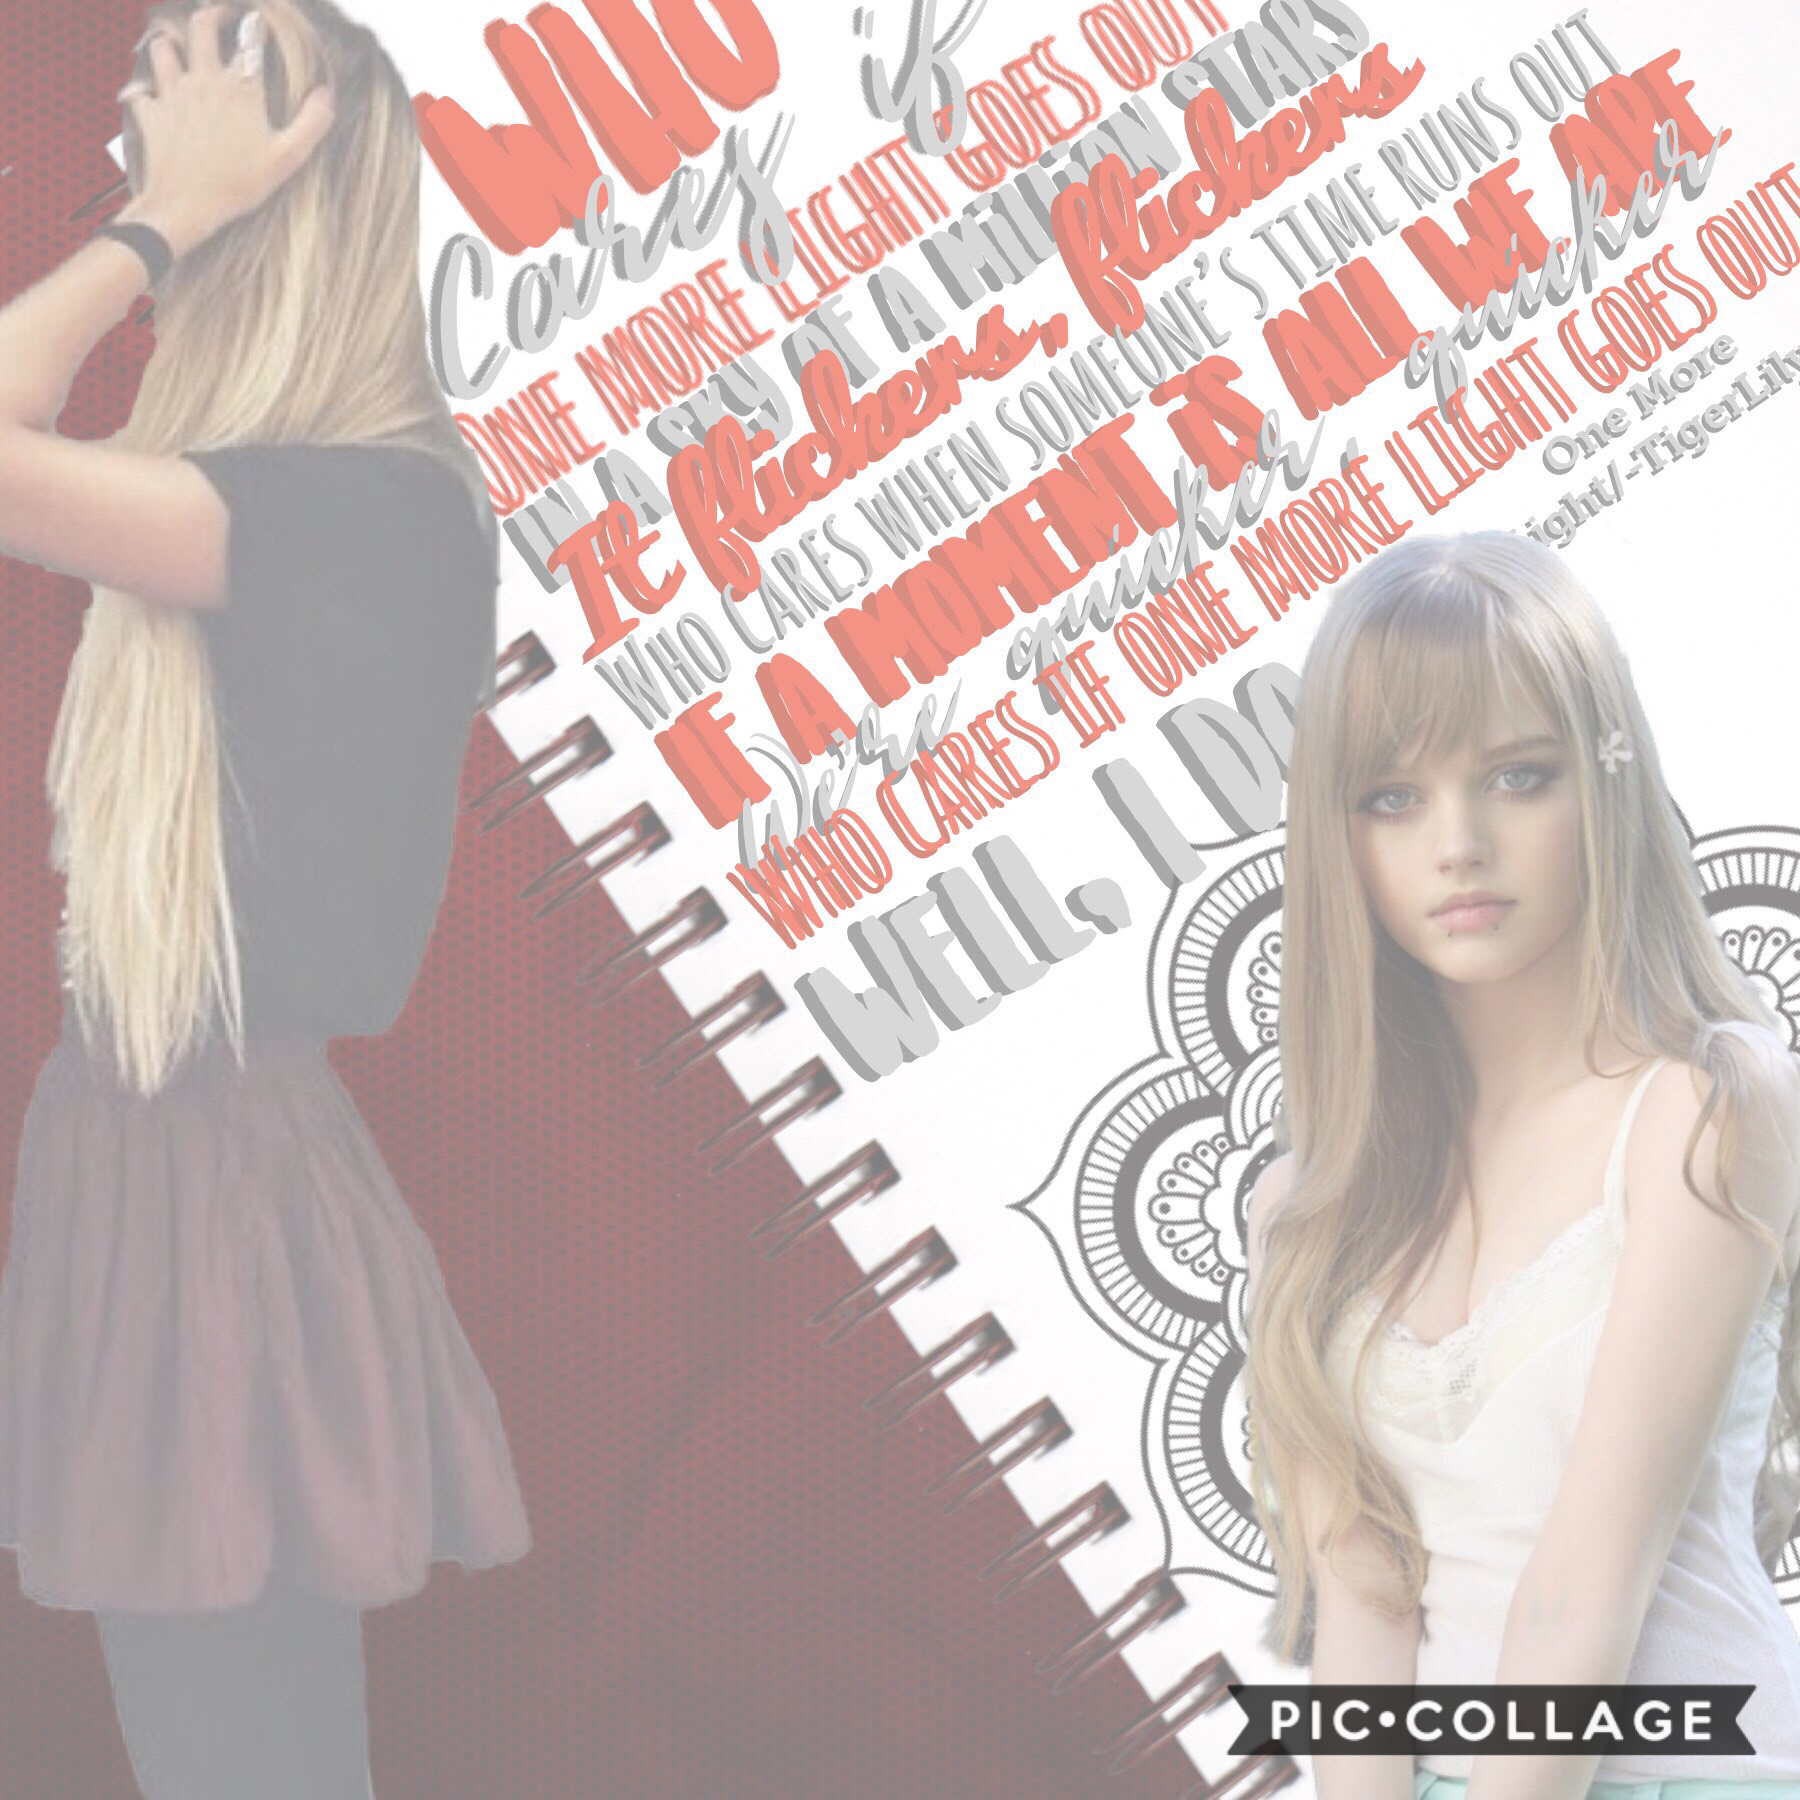 Tappy
I love this song! It’s just such a beautiful song. Who agrees? I actually really like how this collage turned out!!🤗🤗what do y’all think? Also how was your day?